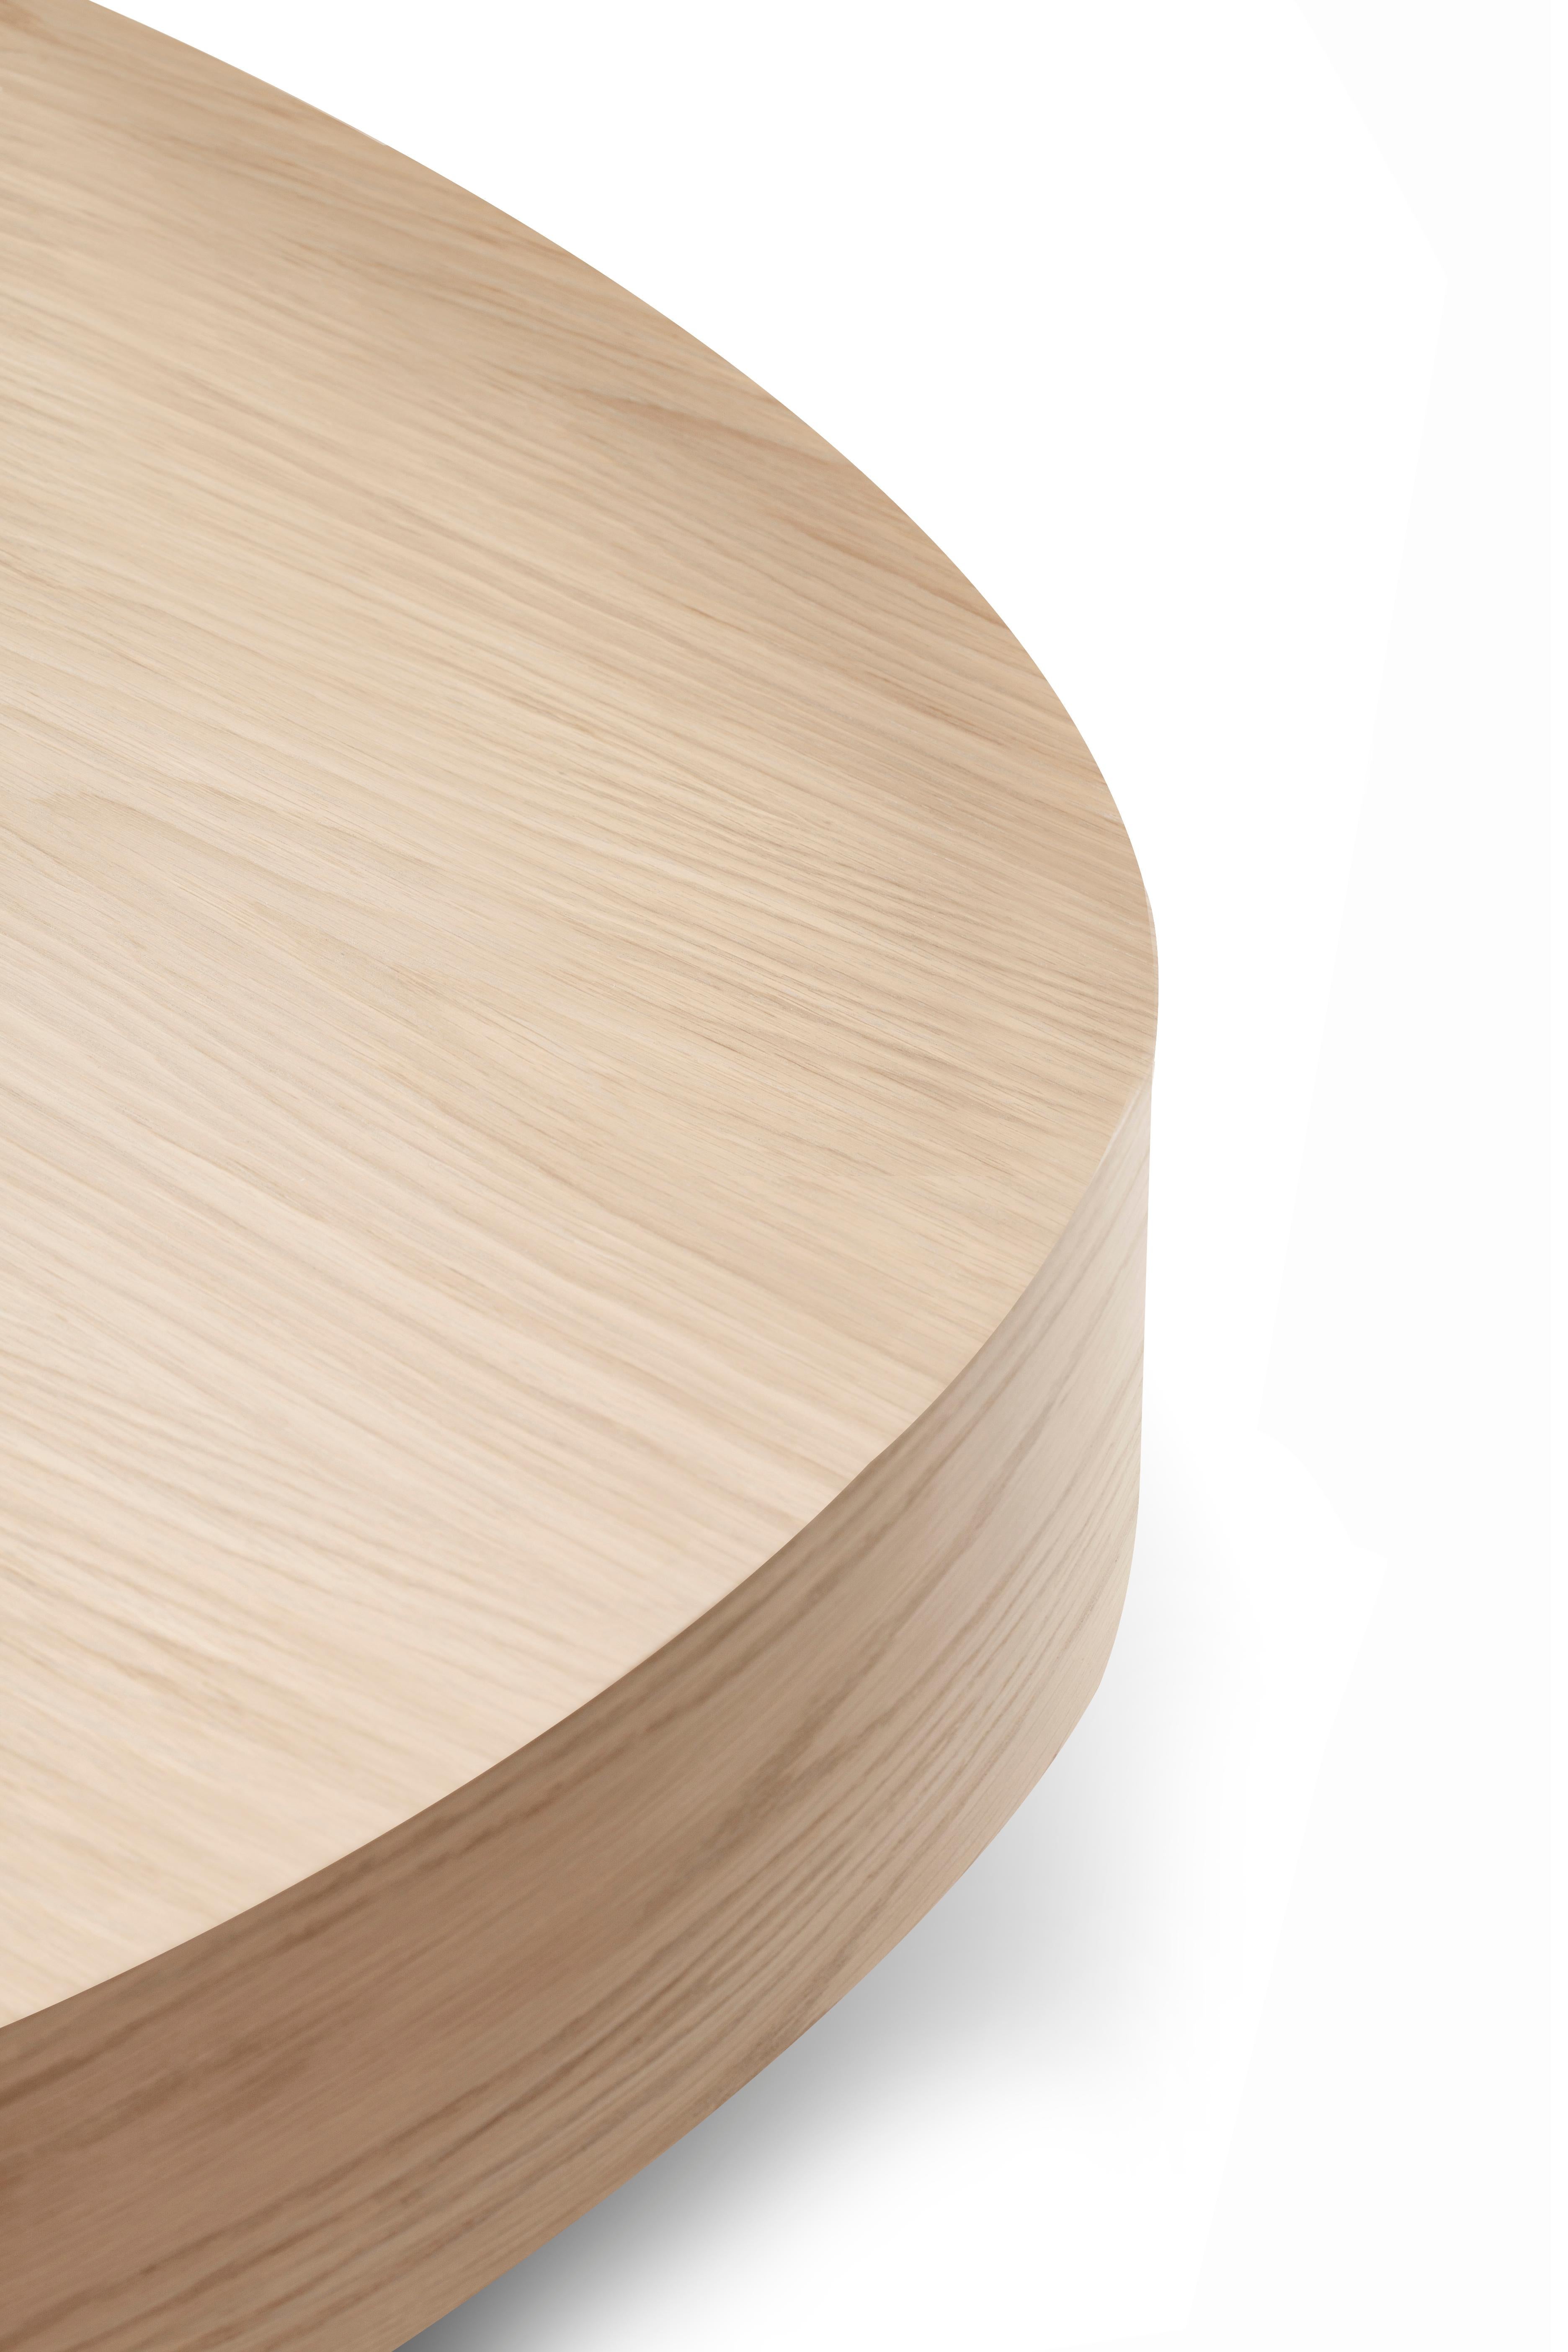 Bassa Center Table in Oak Wood by Collector Studio

Is like having a huge block of Oak wood. This Oak table will not only look beautifull but will also feel incredible as it is finished with a smooth finish that will cast amazing reflections and